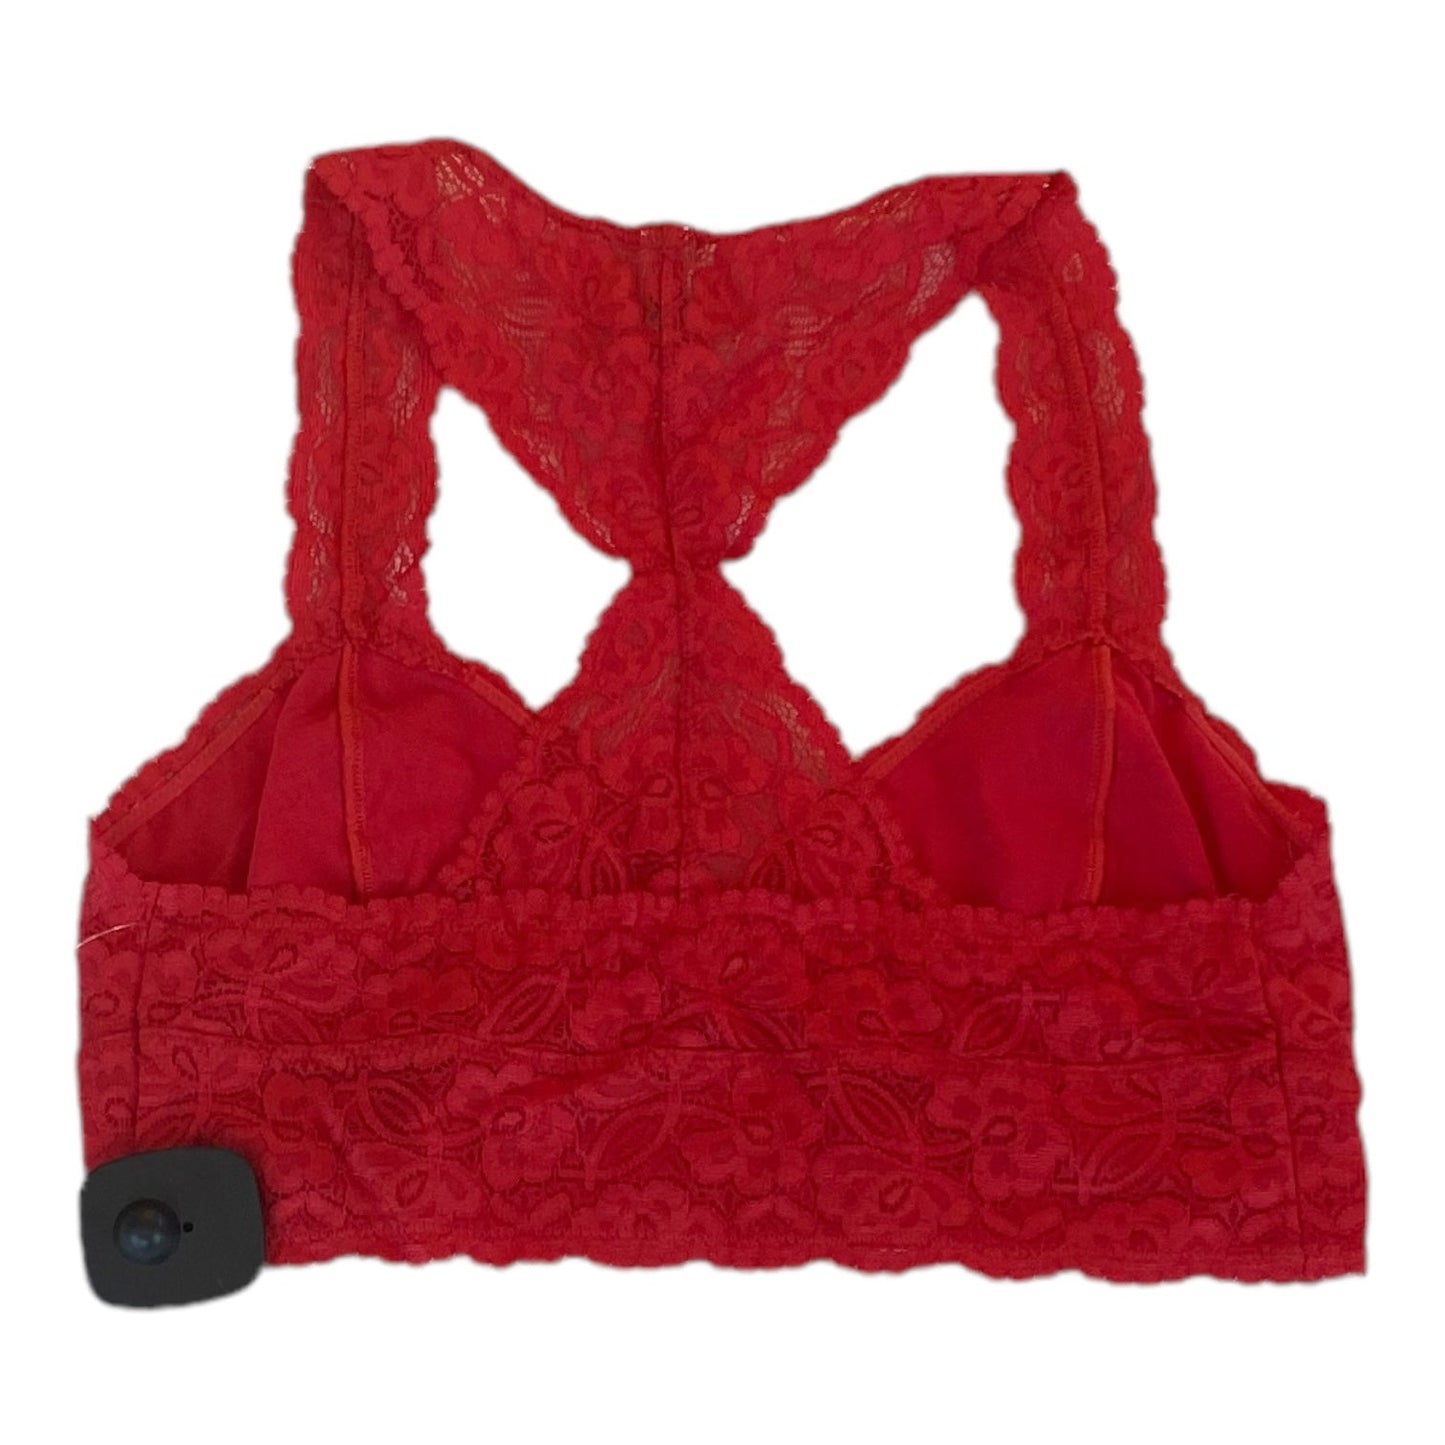 Red Bralette Free People, Size M